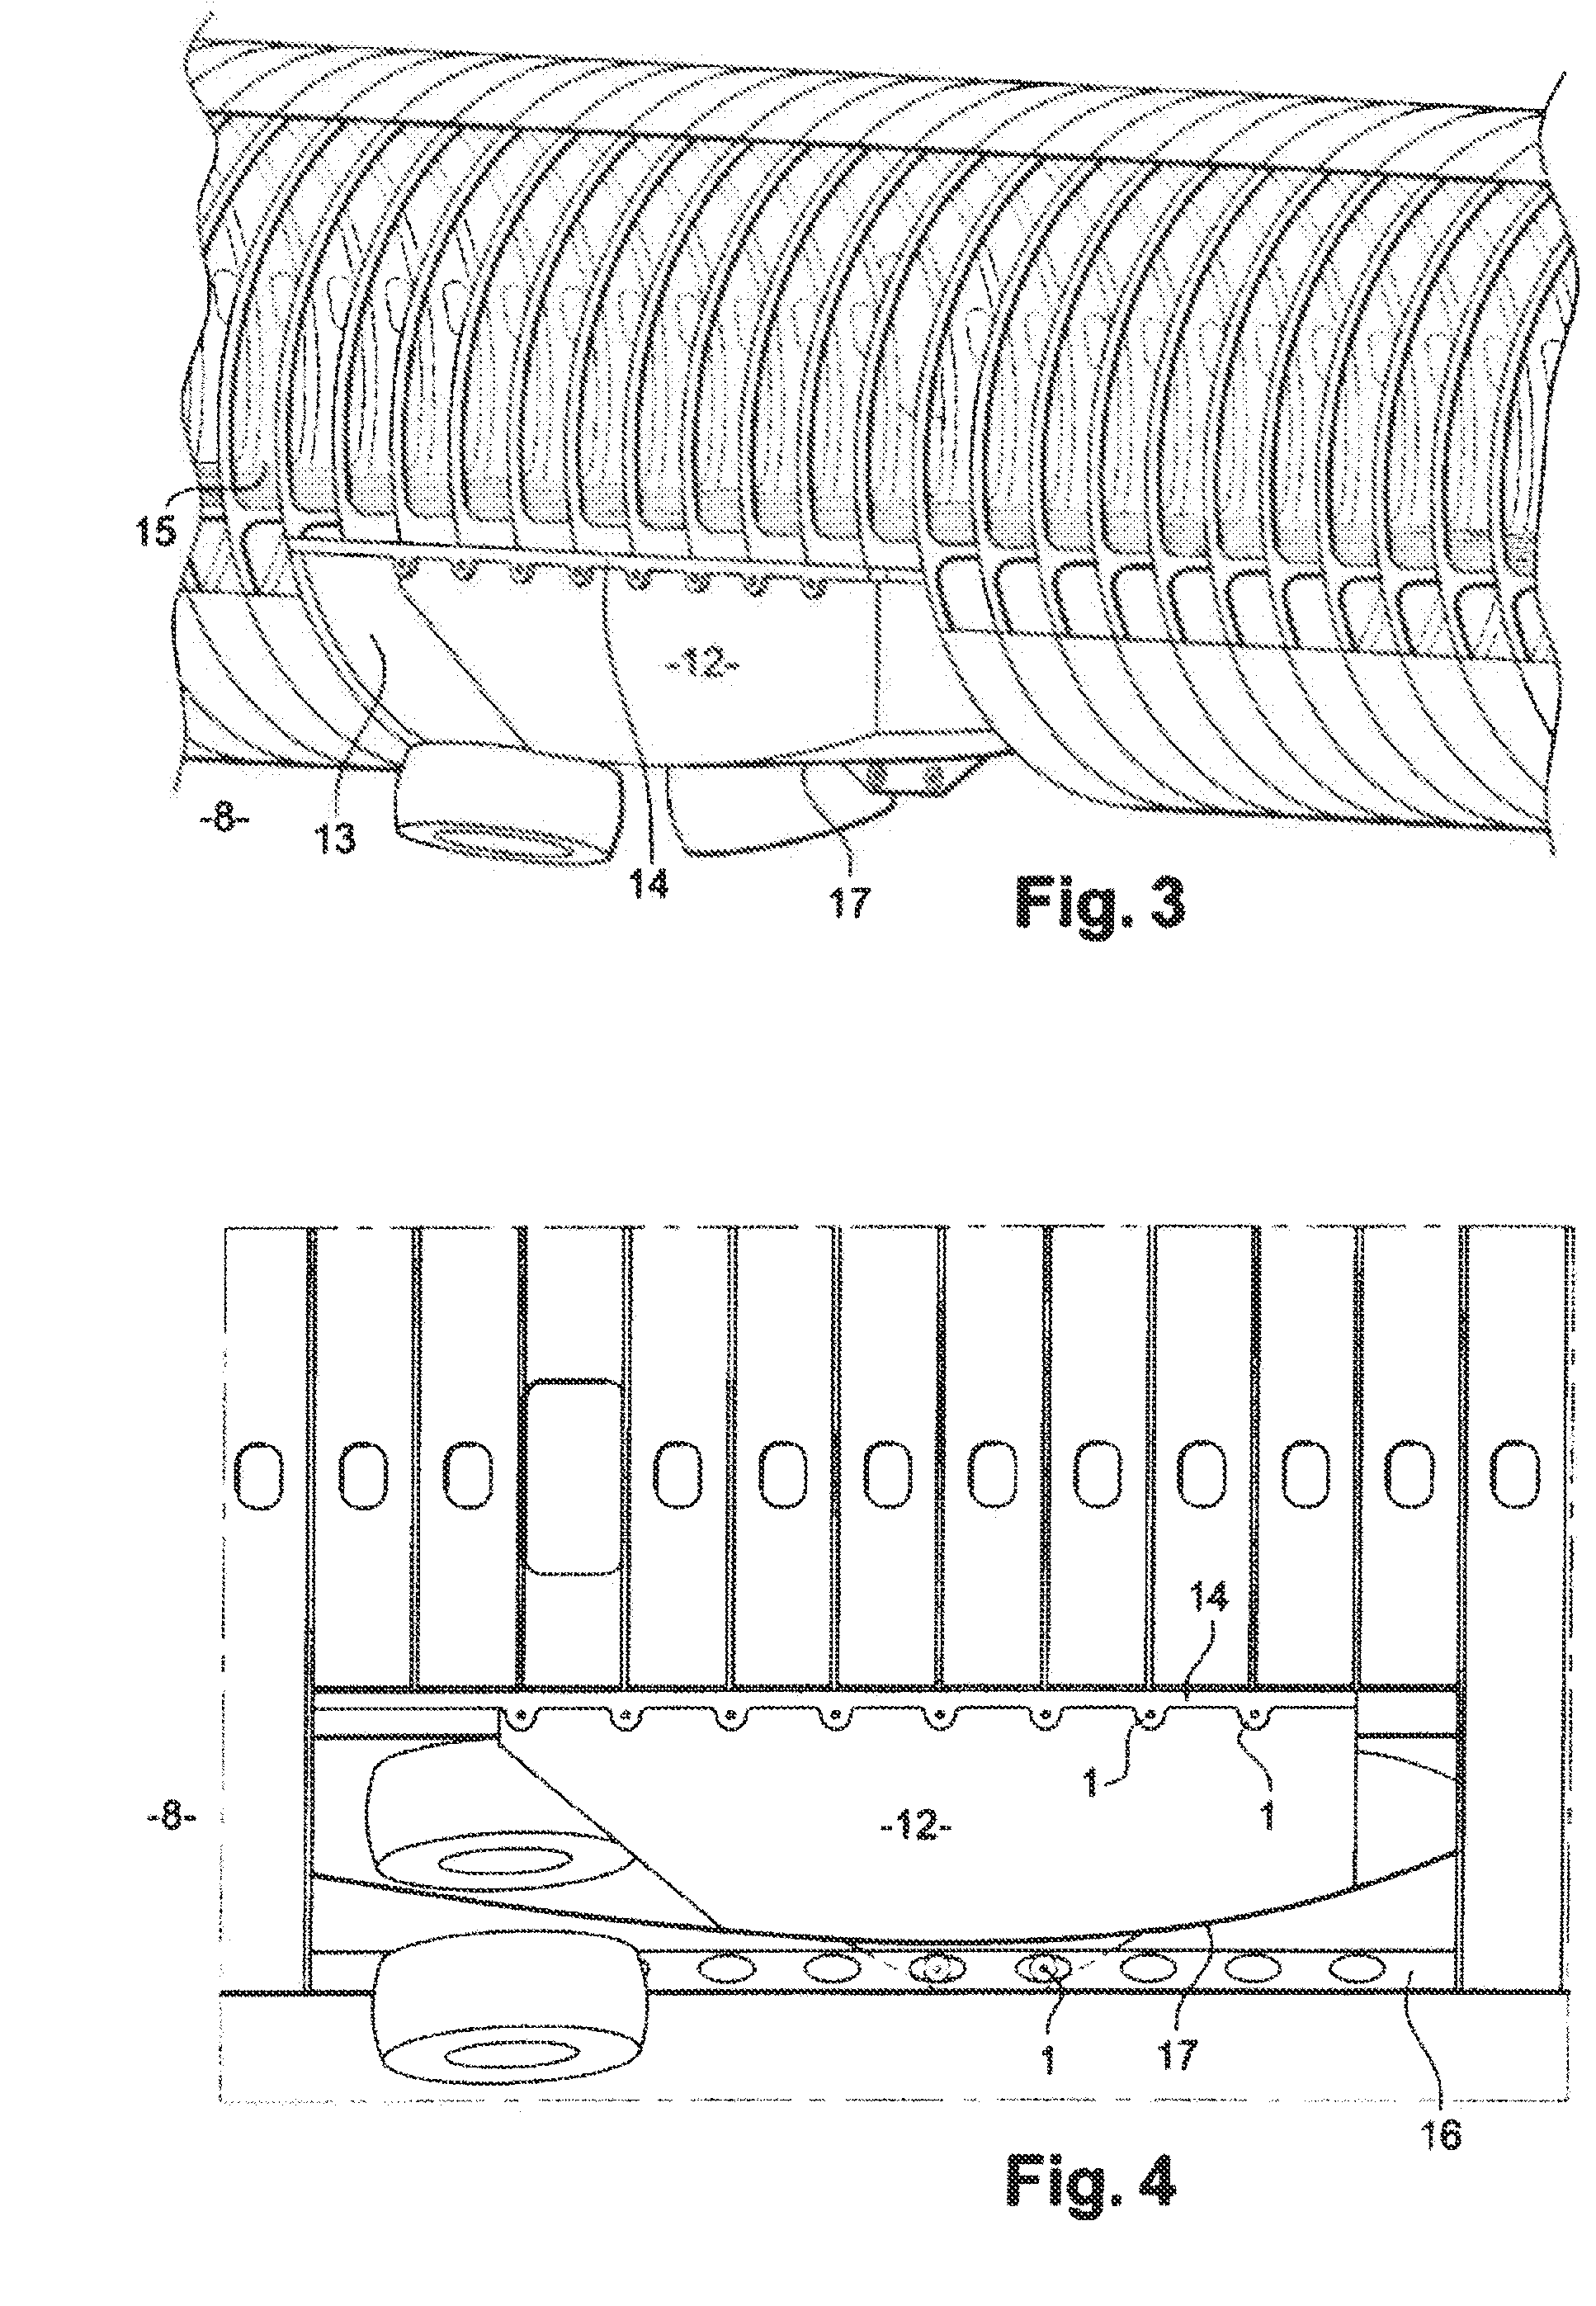 Device for attaching a lift member to the fuselage of an aircraft